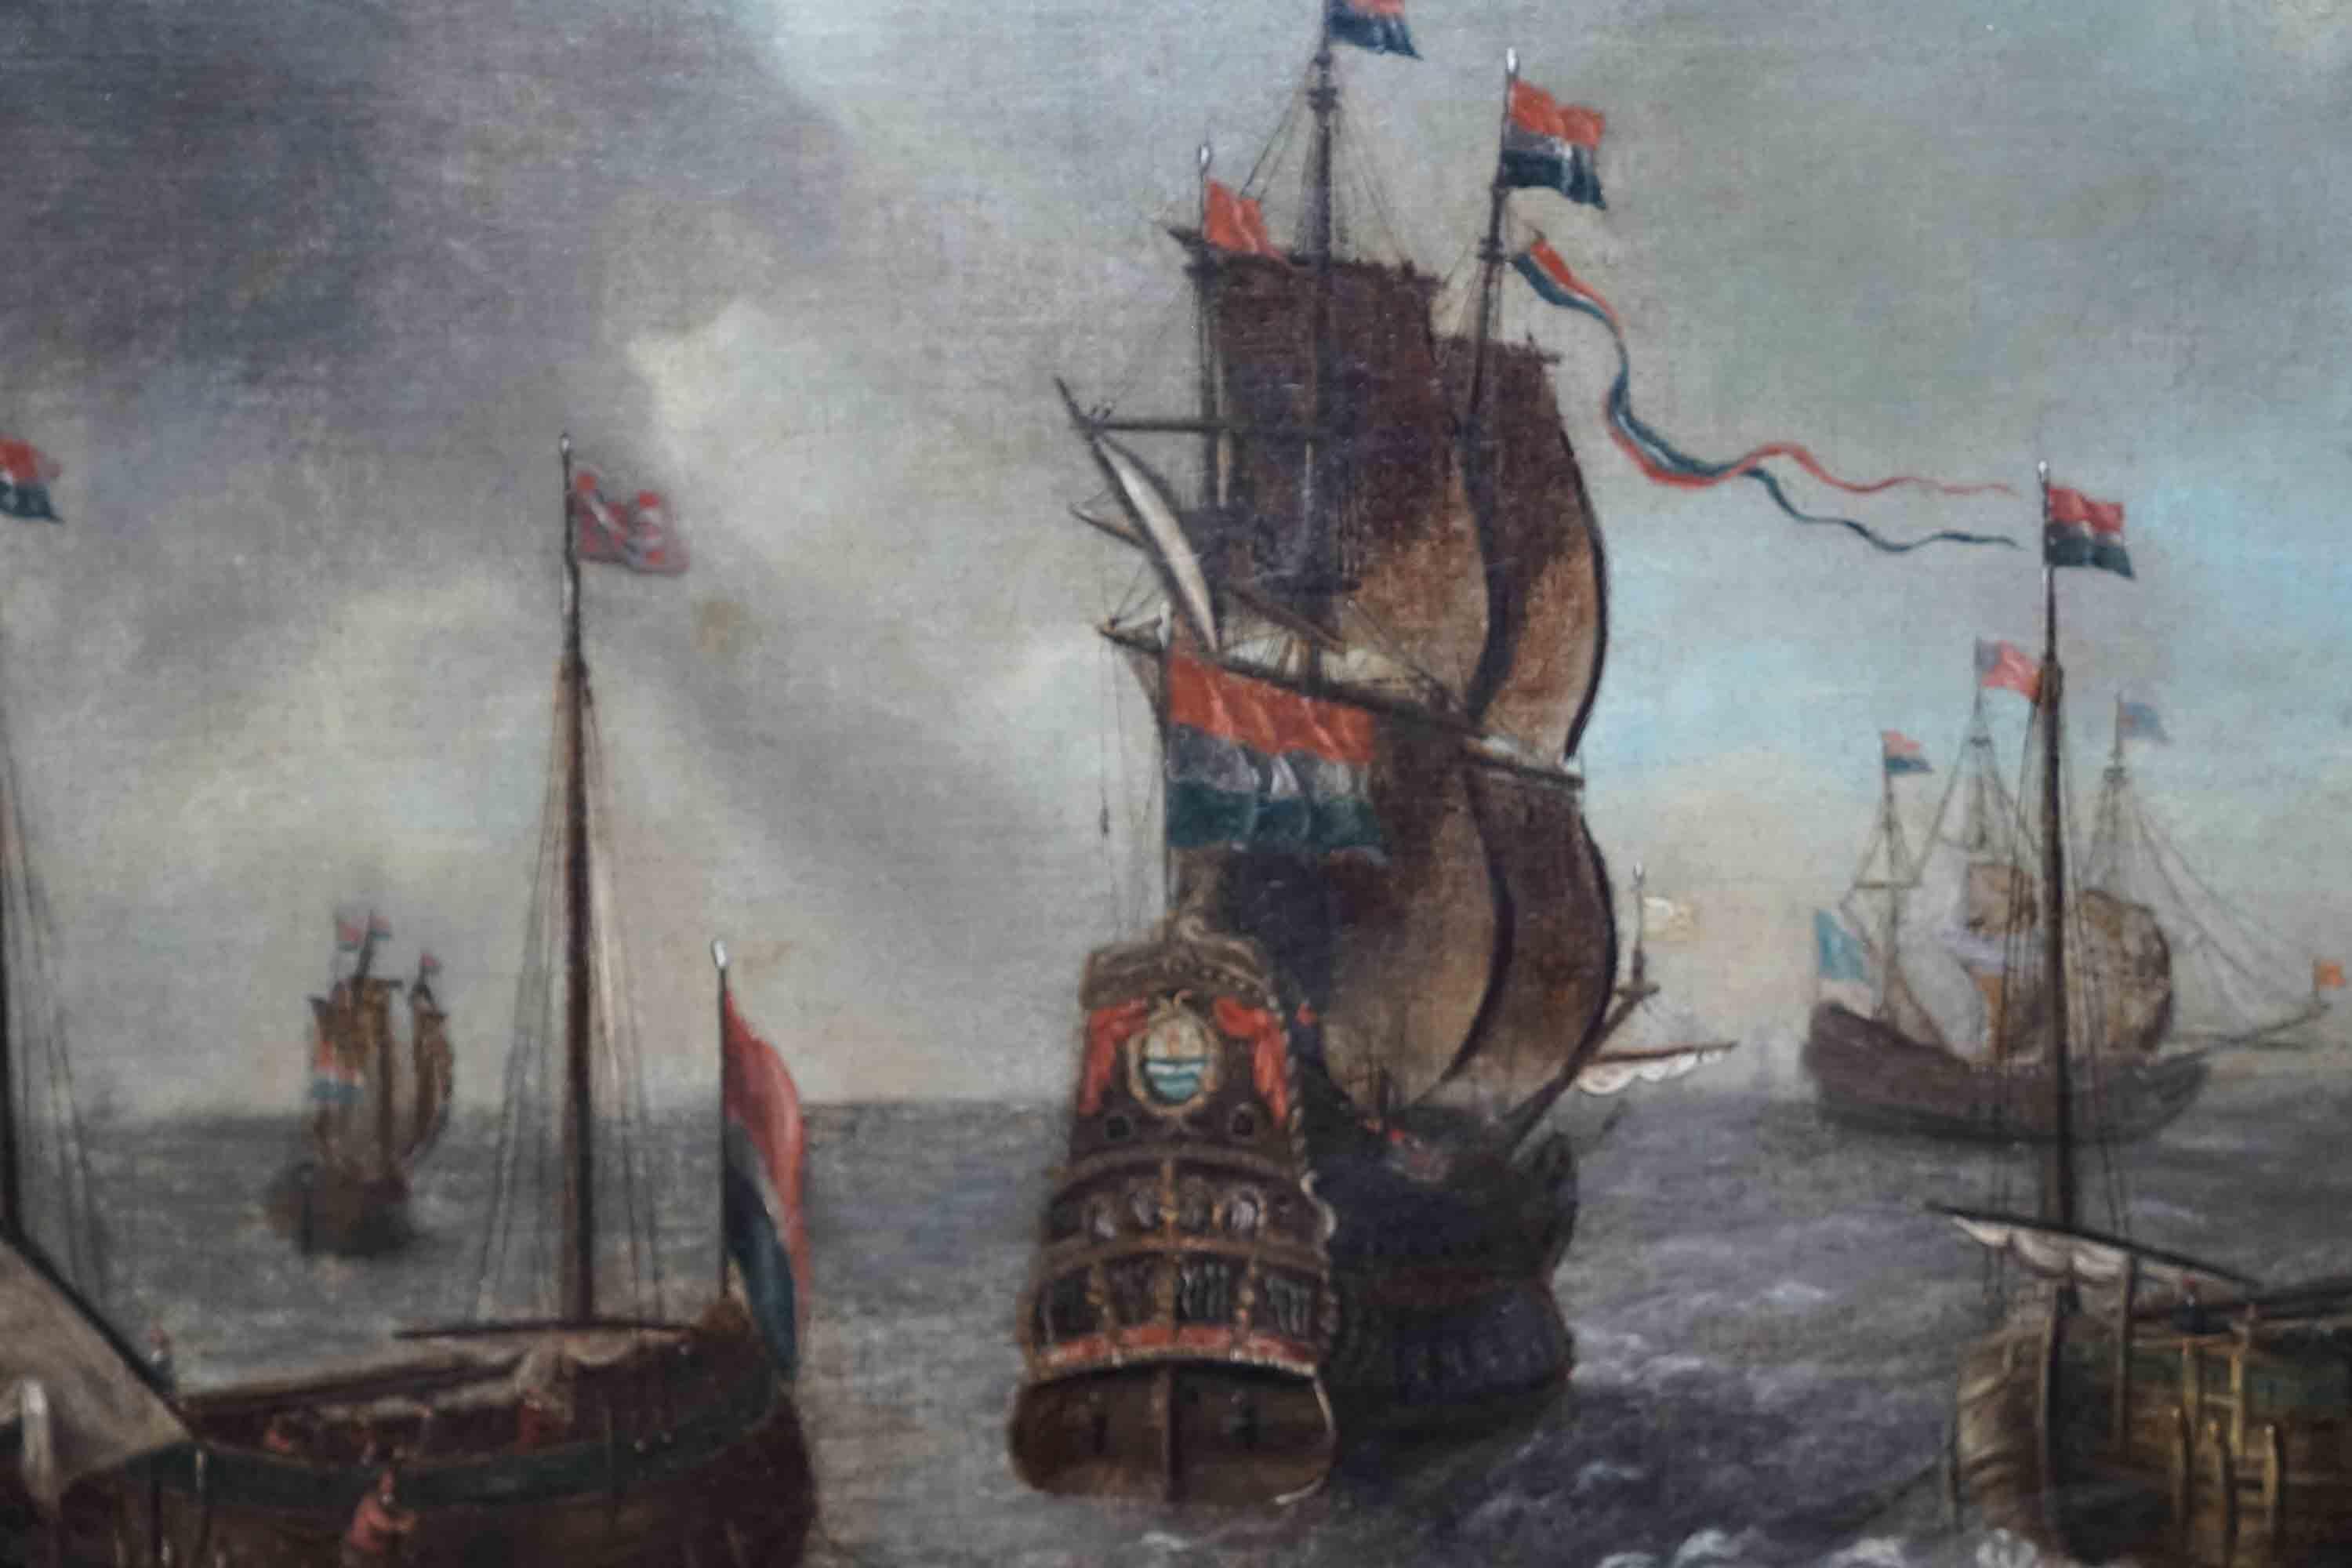 Ships Heading to Sea - Dutch 17th century Old Master marine art oil painting - Old Masters Painting by Abraham Storck